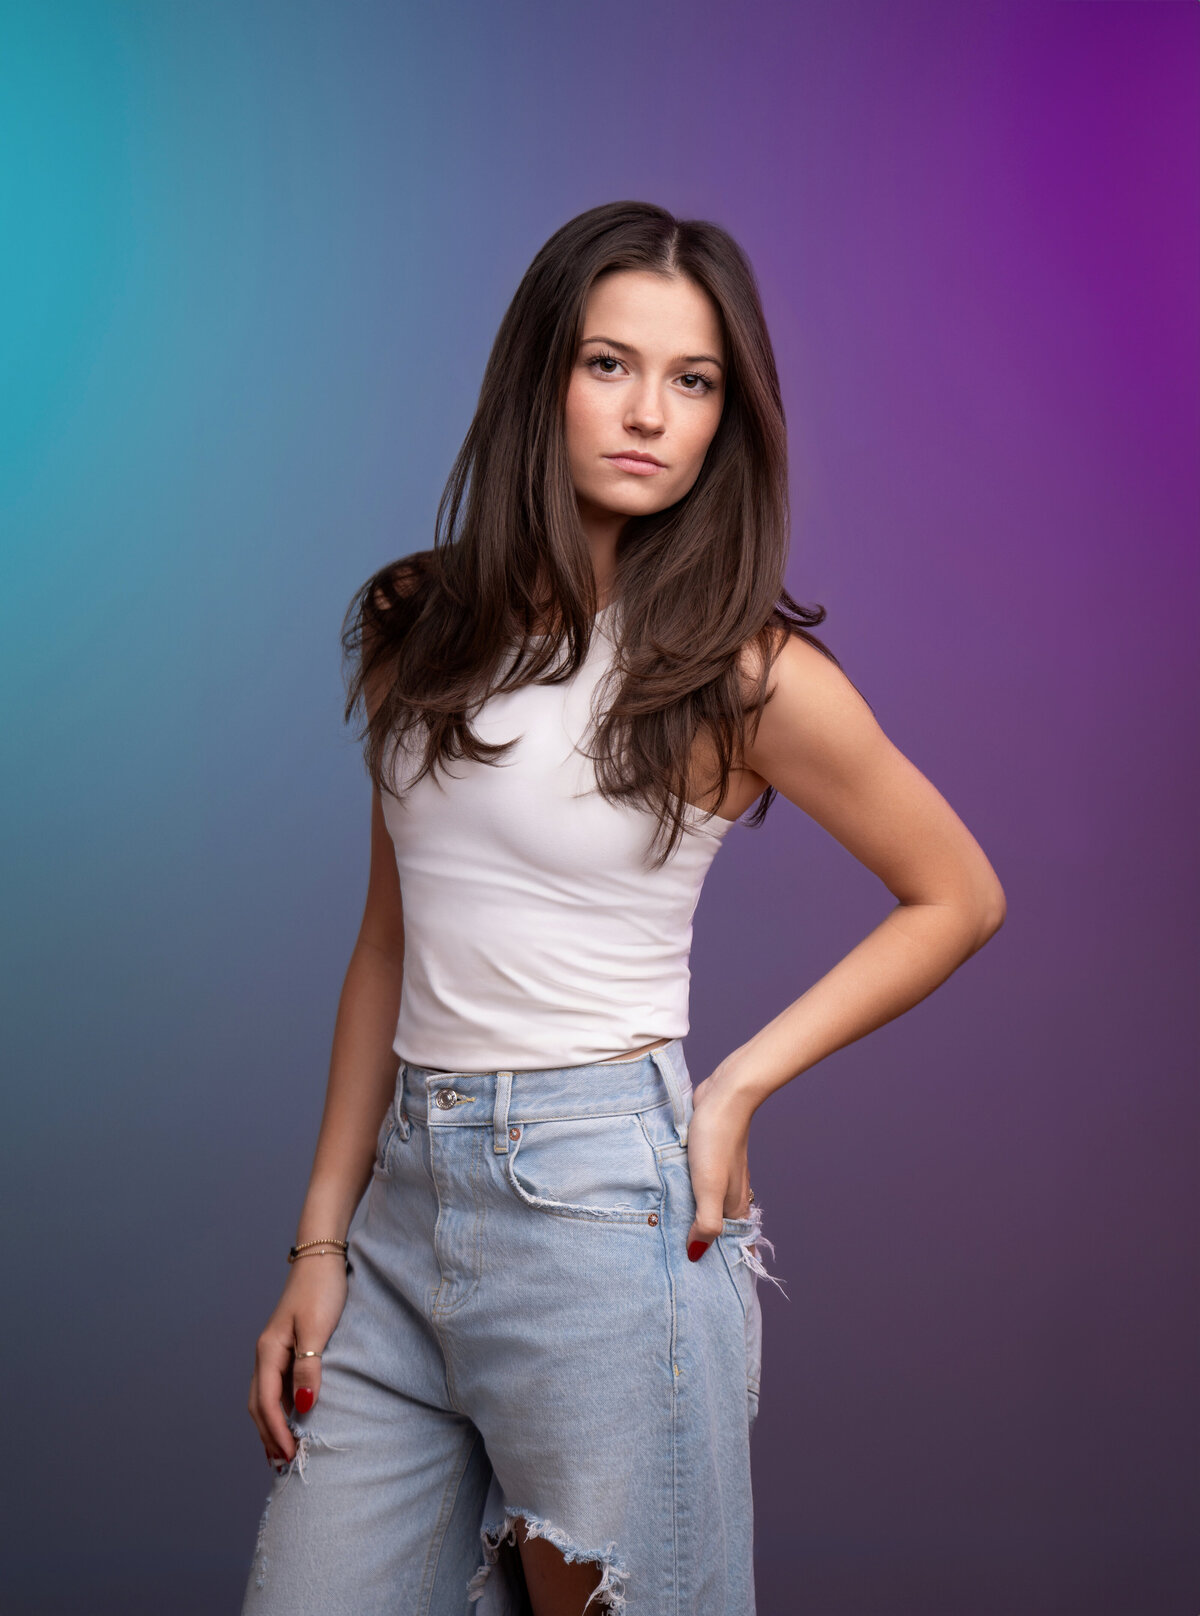 Girl in casual outfit poses like a model for her senior portrait at a creative photography studio